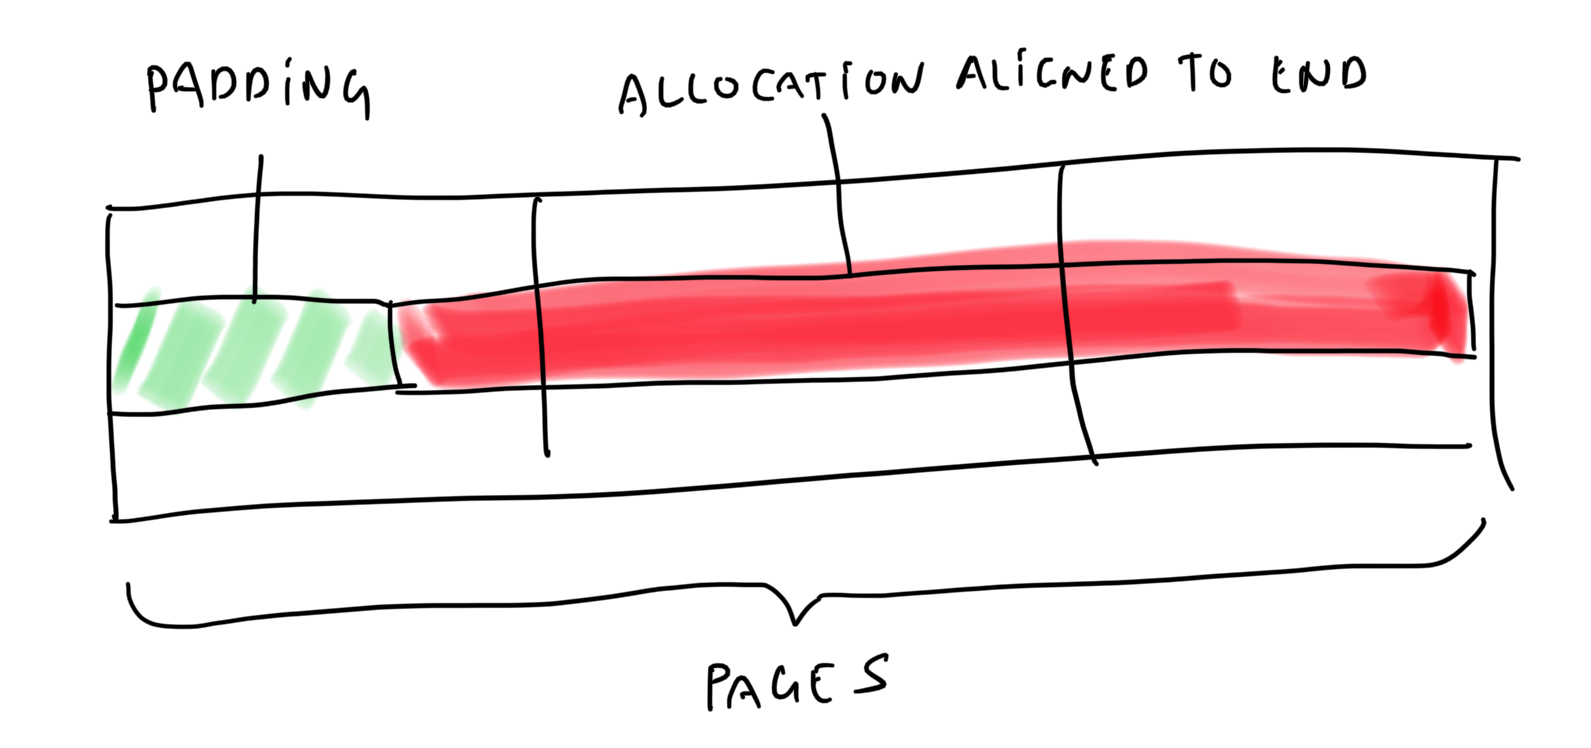 Aligning an allocation to the end of the pages.